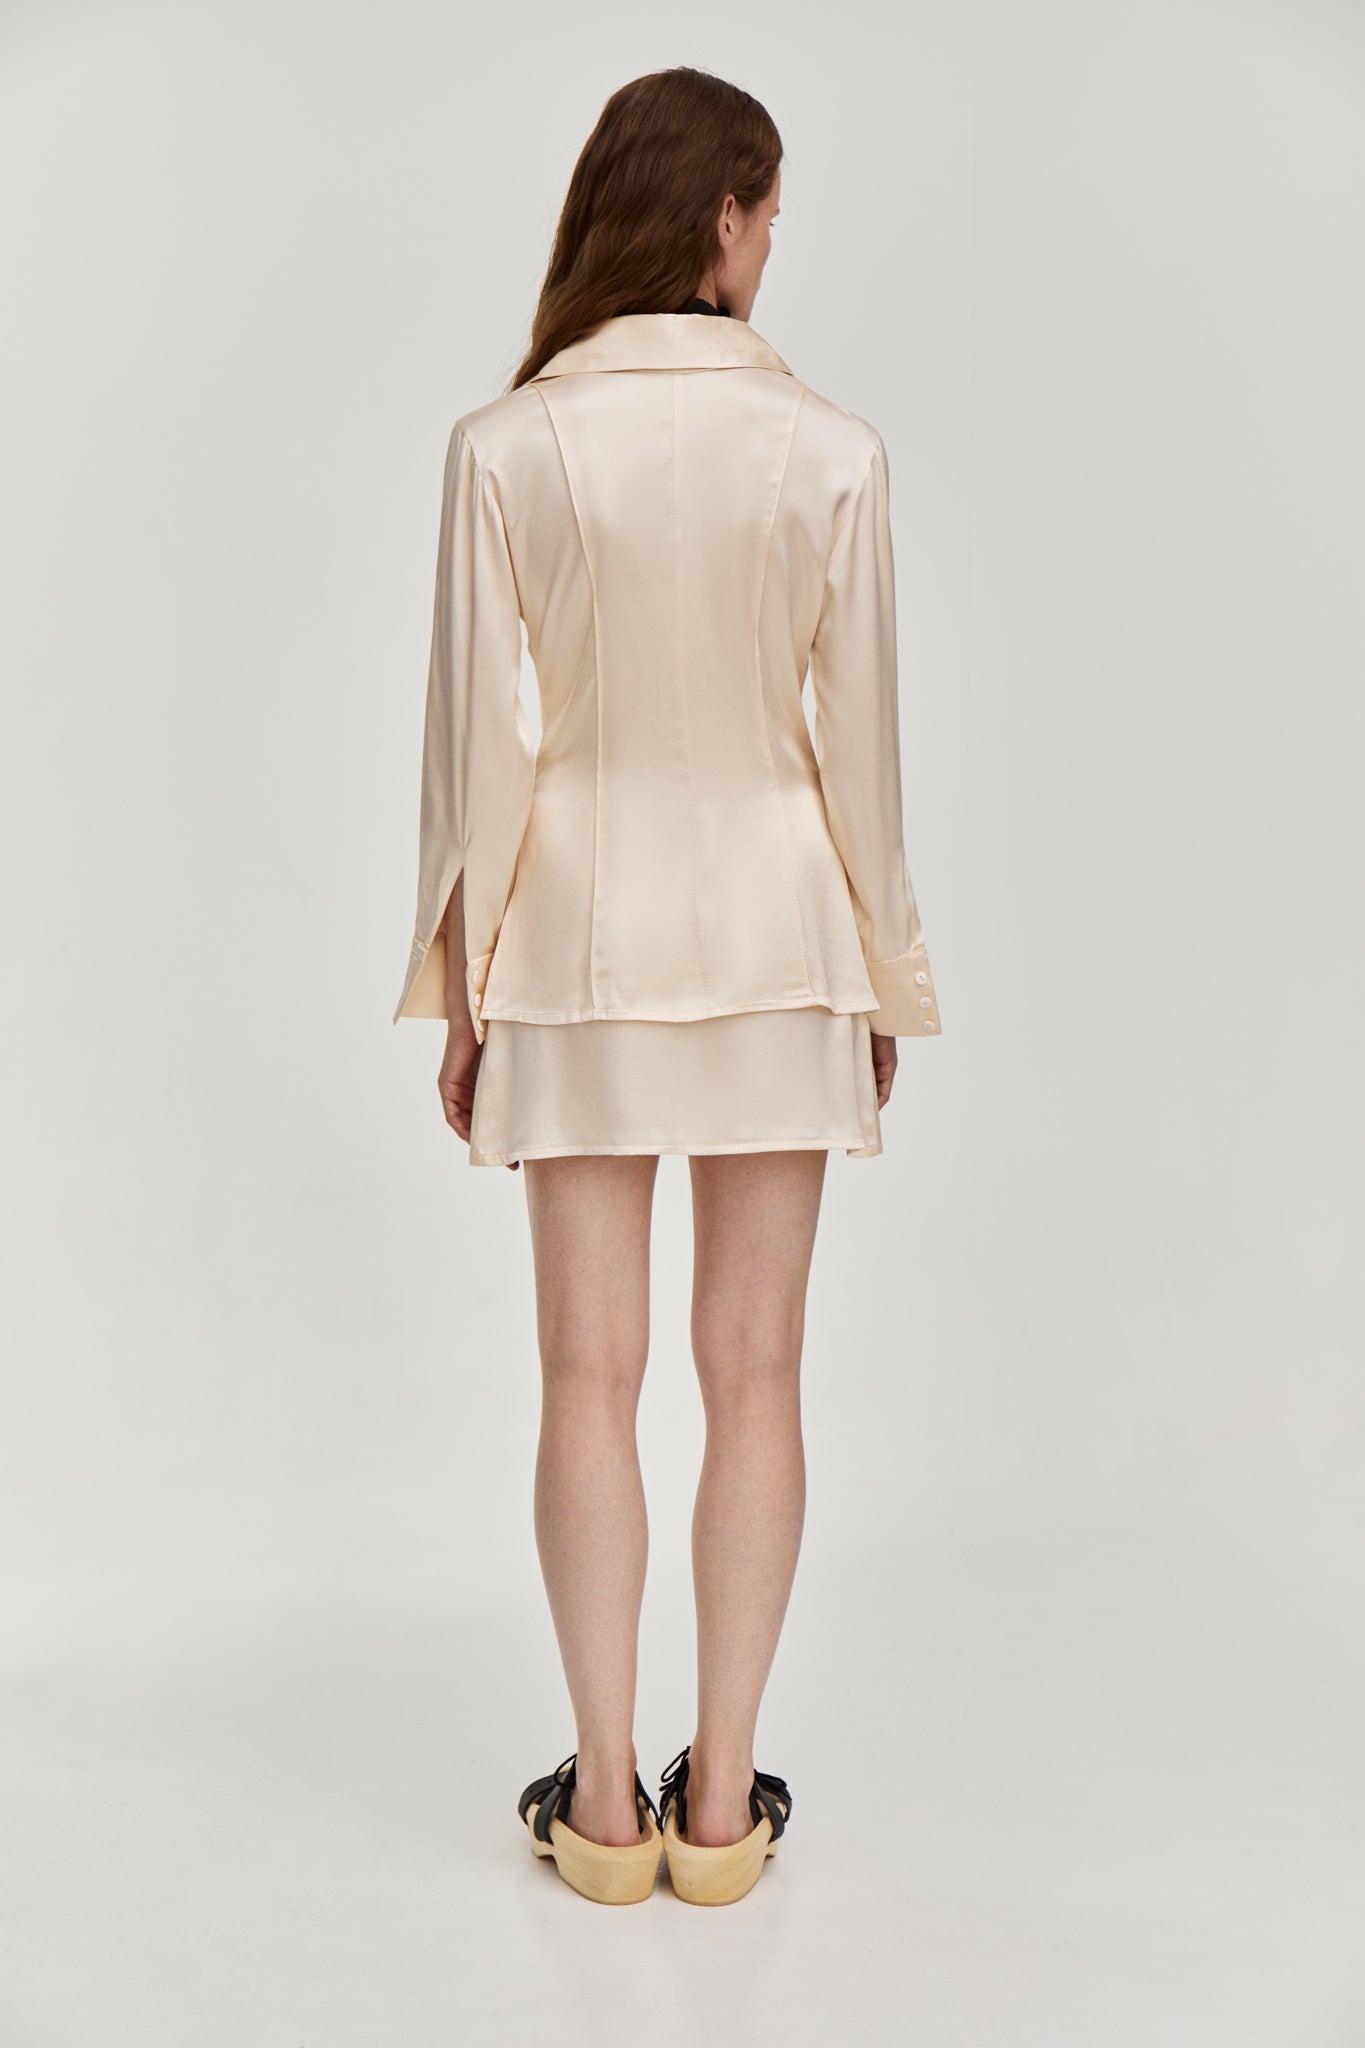 low waist mini silky skirt in creme color from FORMA clothing brand